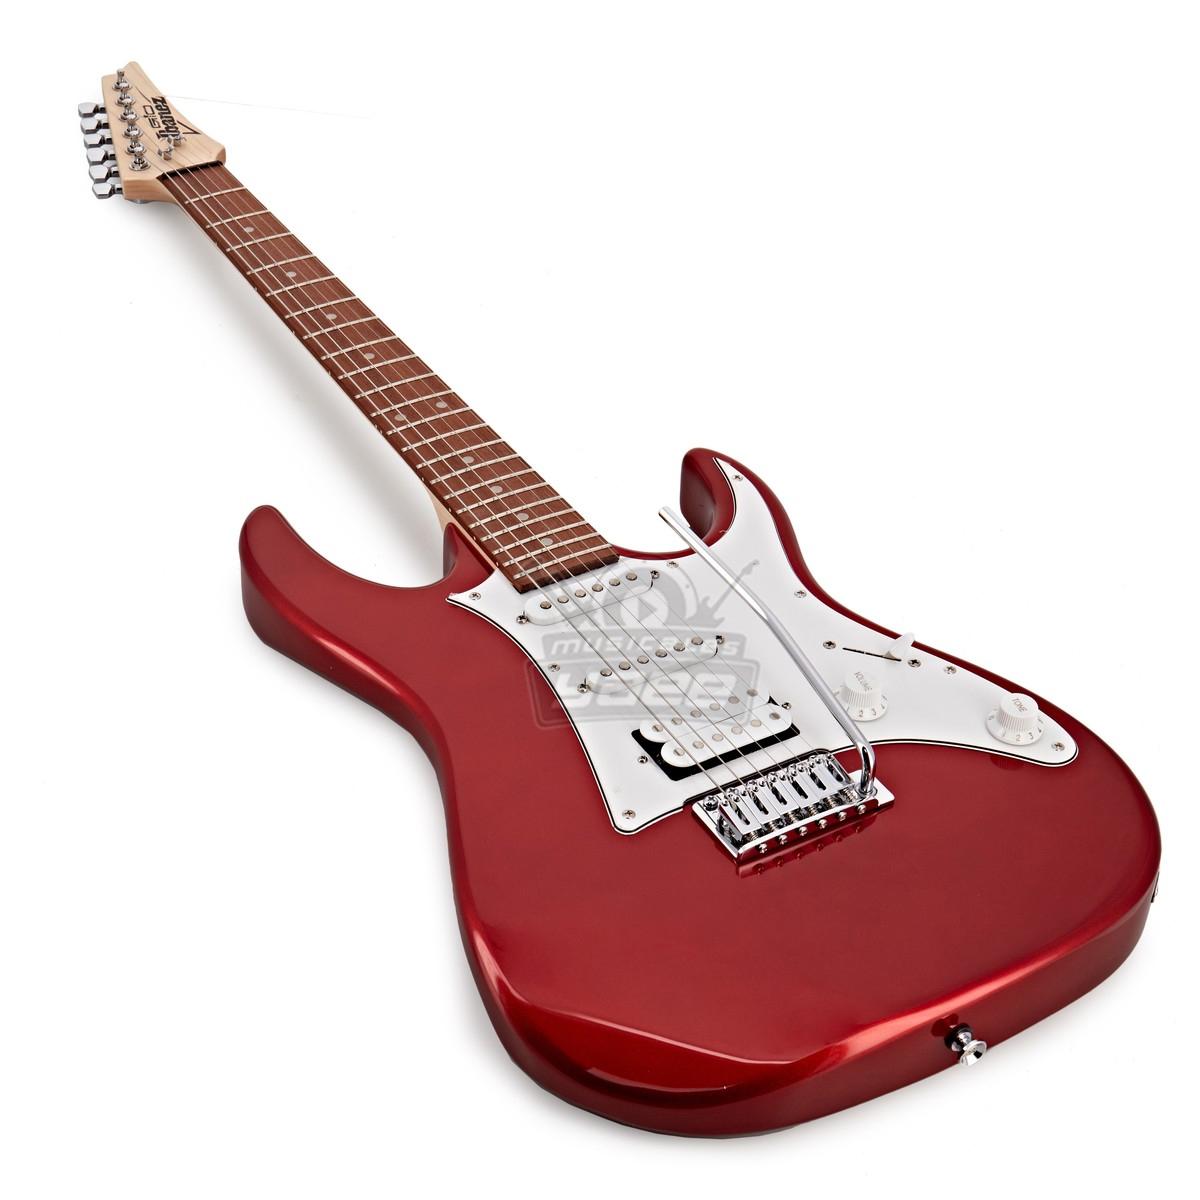 IBANEZ GIO RG GRX40-CA GUITARRA ELECTRICA Candy Apple Red